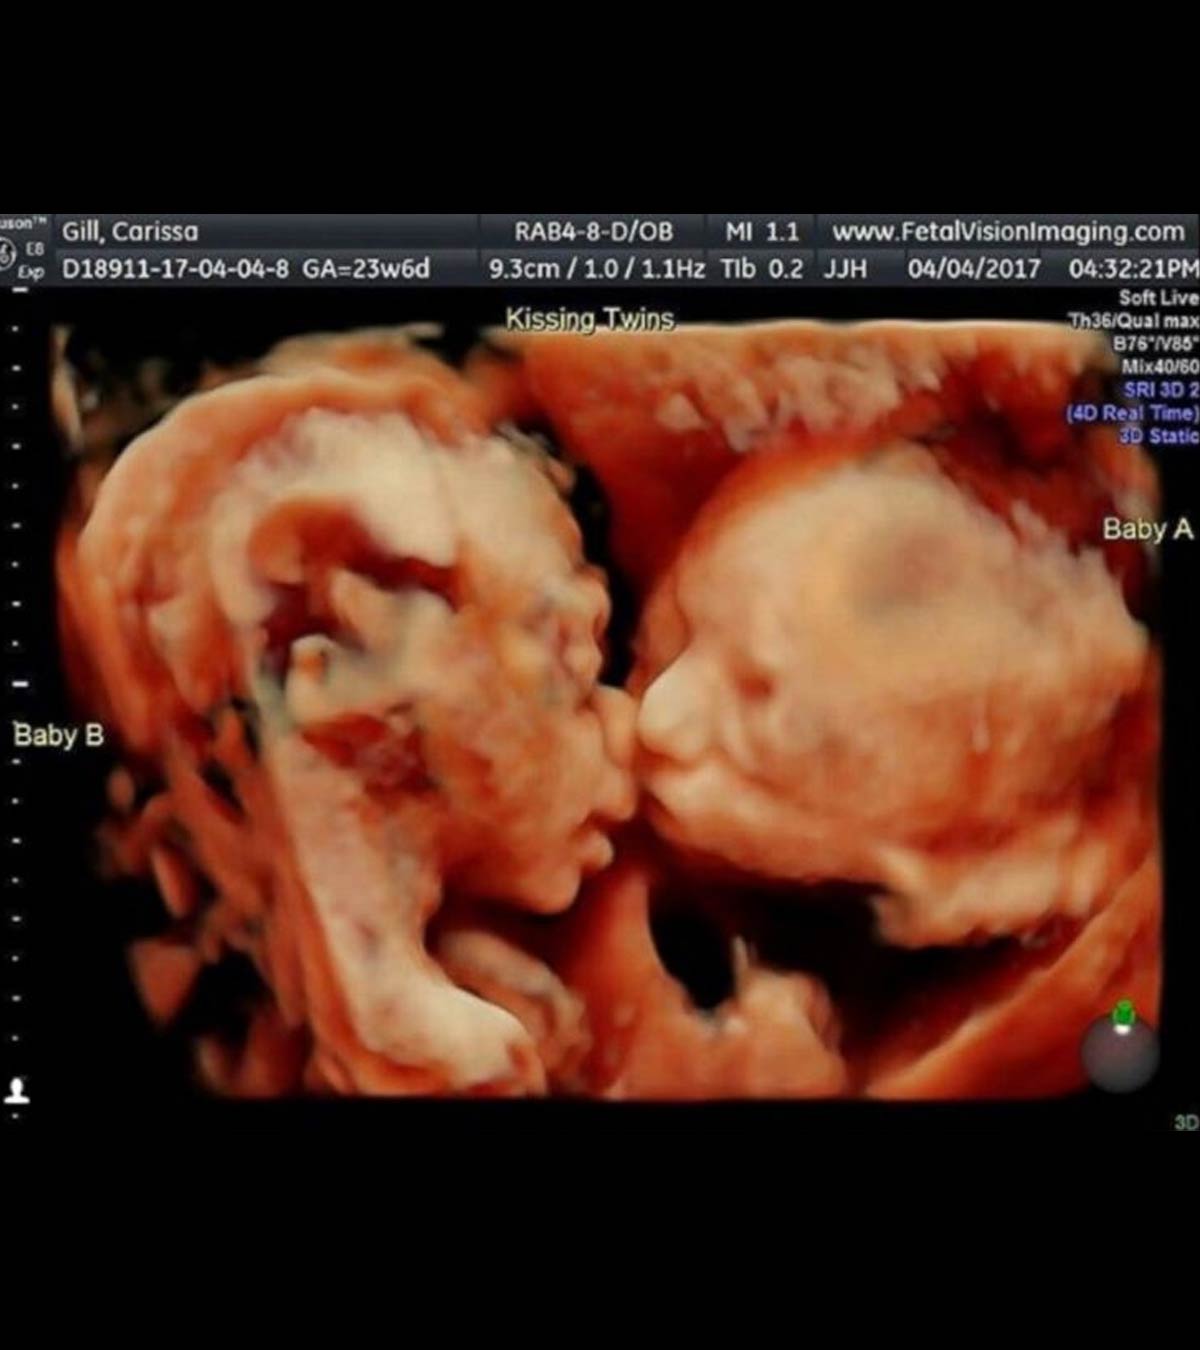 Pregnant Mom’s Ultrasound Reveals Twin Babies “Kissing” Inside The Womb